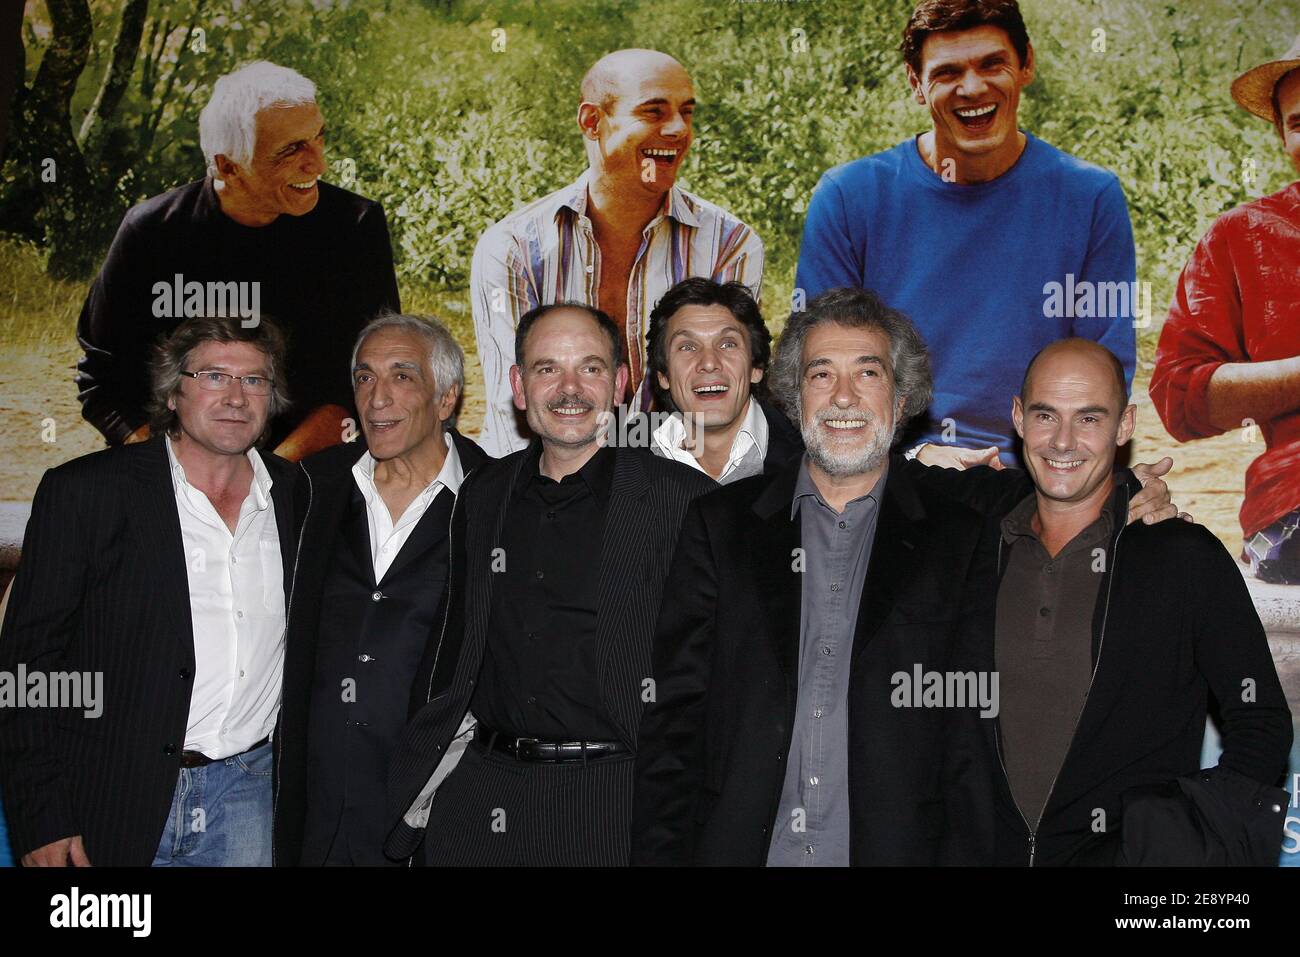 Gerard Darmon, Jean-Pierre Darroussin, Marc Lavoine, Marc Esposito, Bernard Campan attend the premiere of Le Coeur des Hommes 2, held at the Gaumont Marignan theater in Paris, France, on October 15, 2007. Photo by Thierry Orban/ABACAPRESS.COM Stock Photo